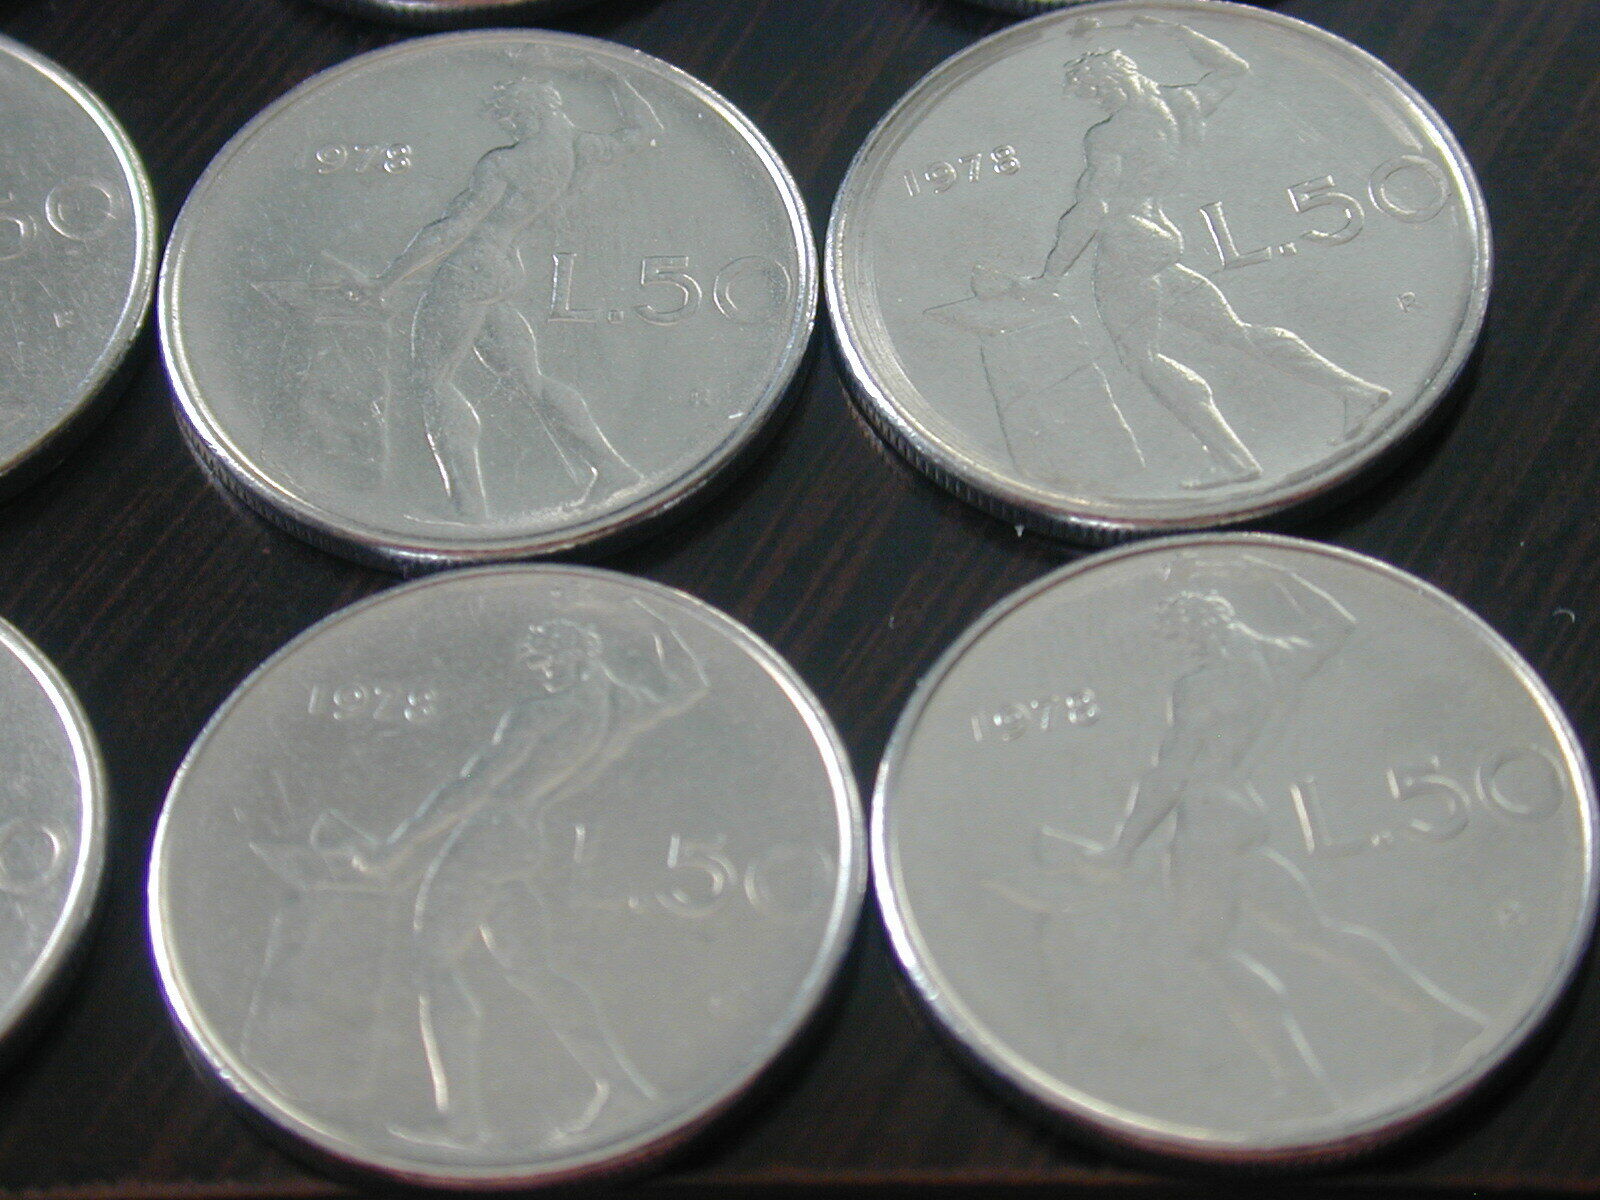 ITALY 19 pc Stainless Steel 50 lire 1955-78 KM95 16 pcs and 1 93 KM95a Nice Lot Без бренда - фотография #9